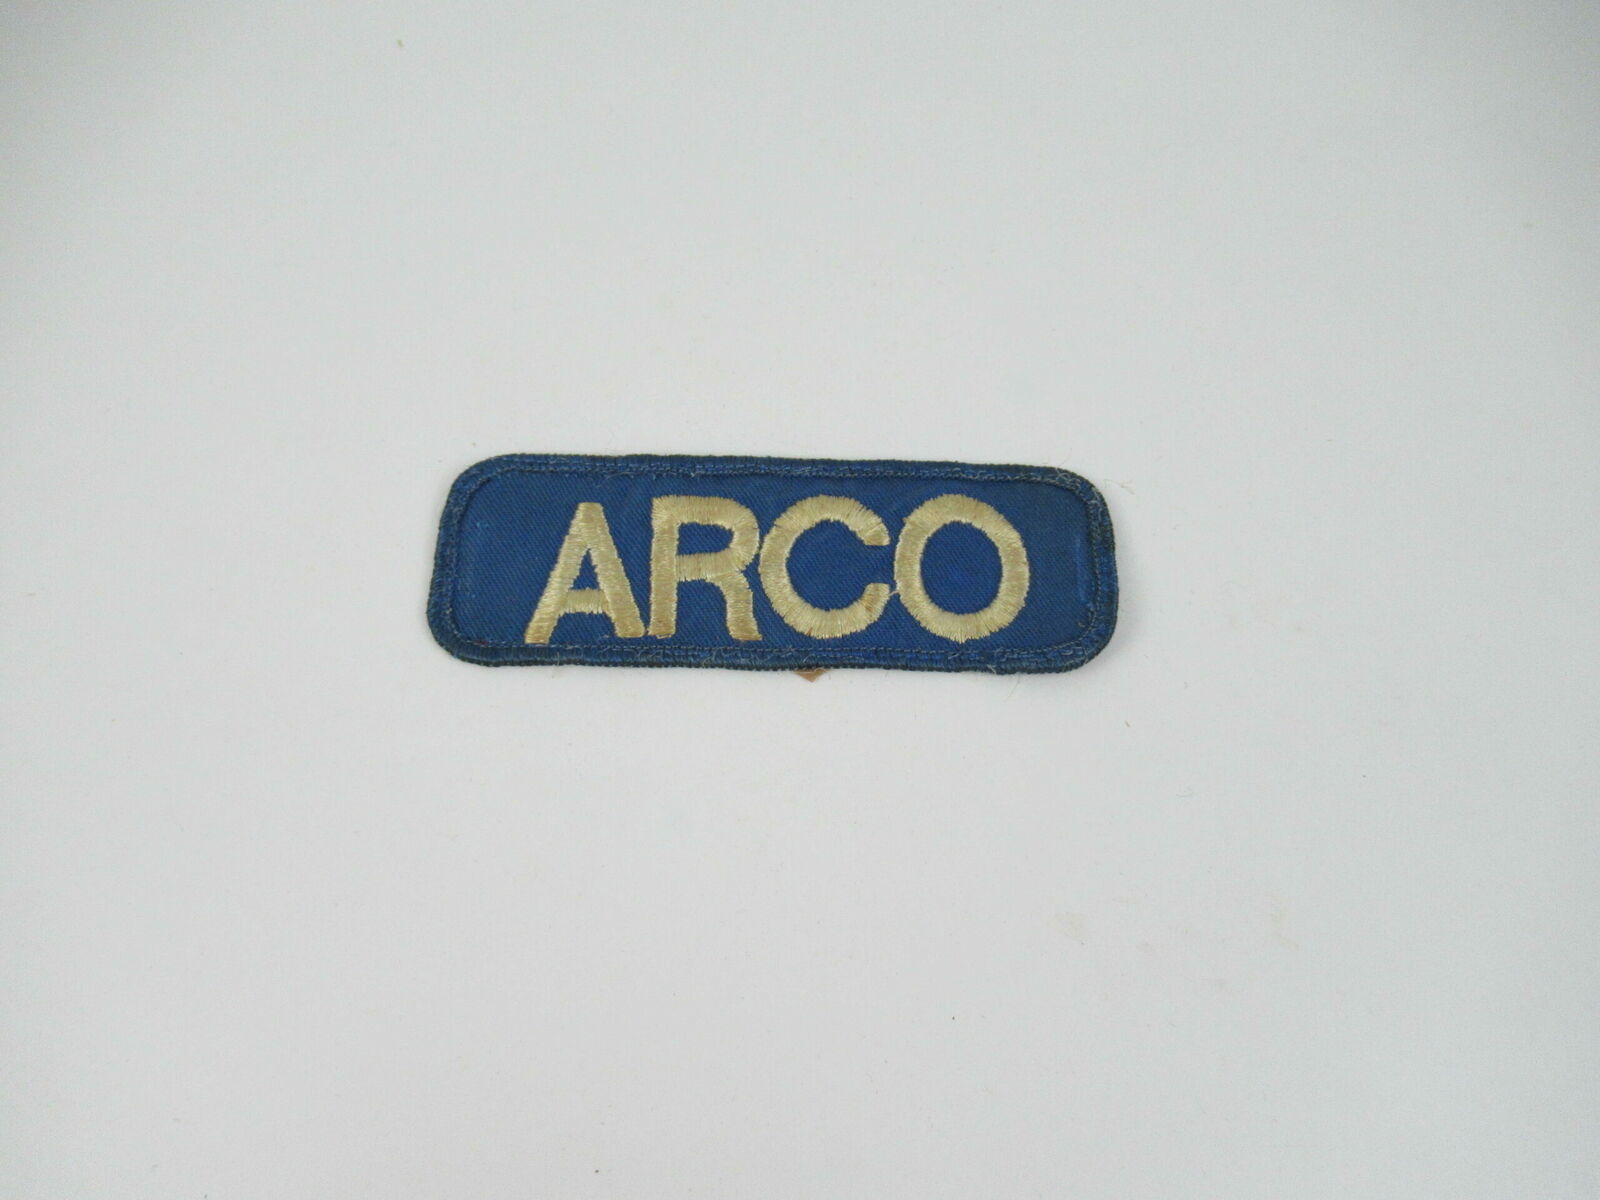 VINTAGE ARCO OIL GAS COMPANY EMBROIDERED UNIFORM SHIRT POCKET PATCH BADGE USA